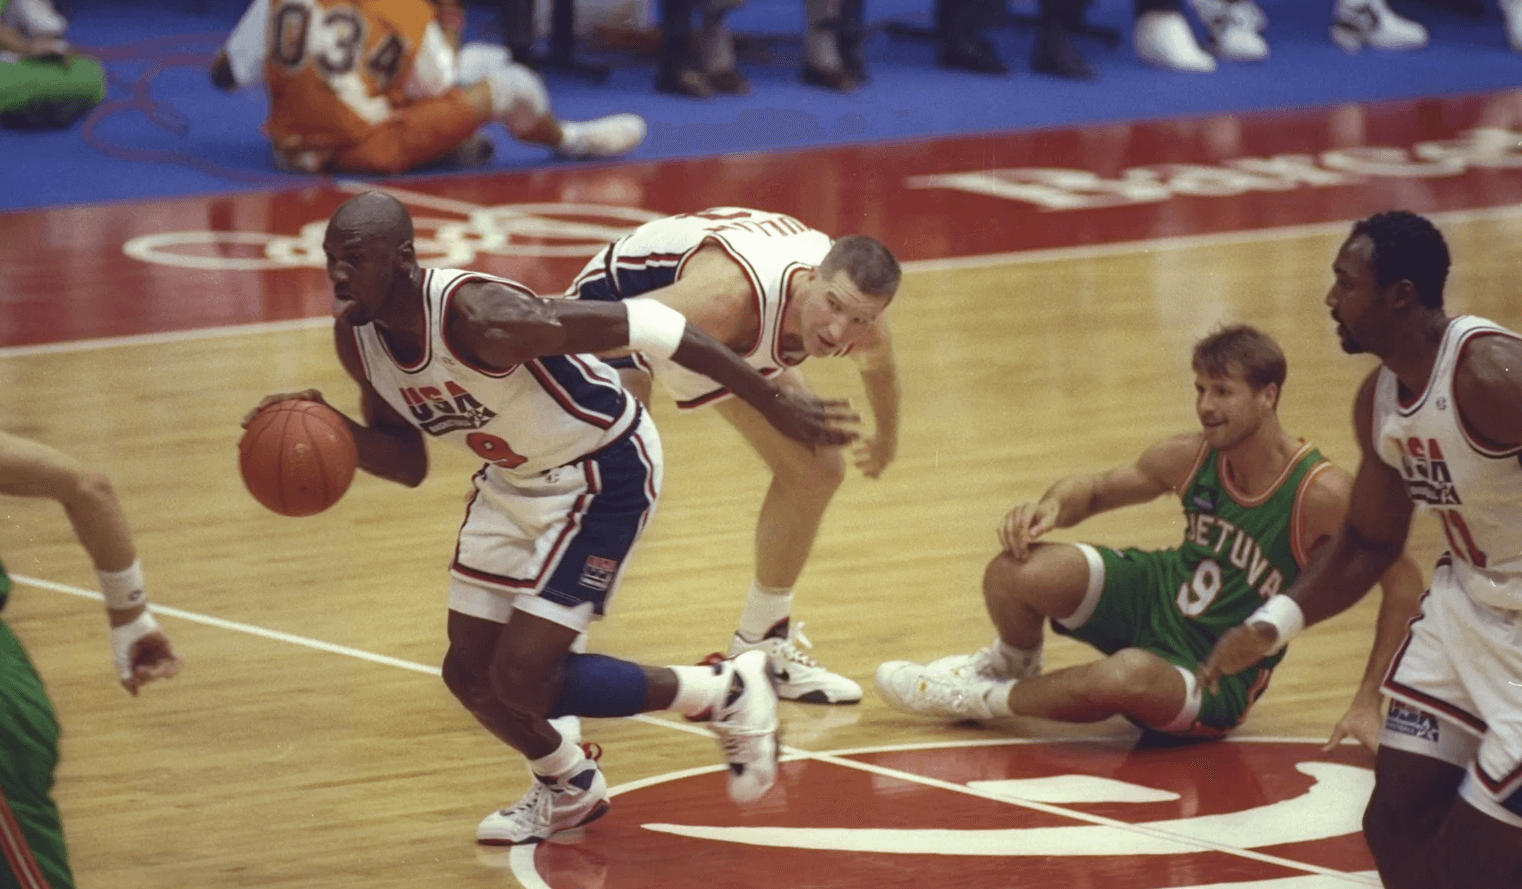 Jordan and the Dream Team playing during Barcelona's 1992 Olympics